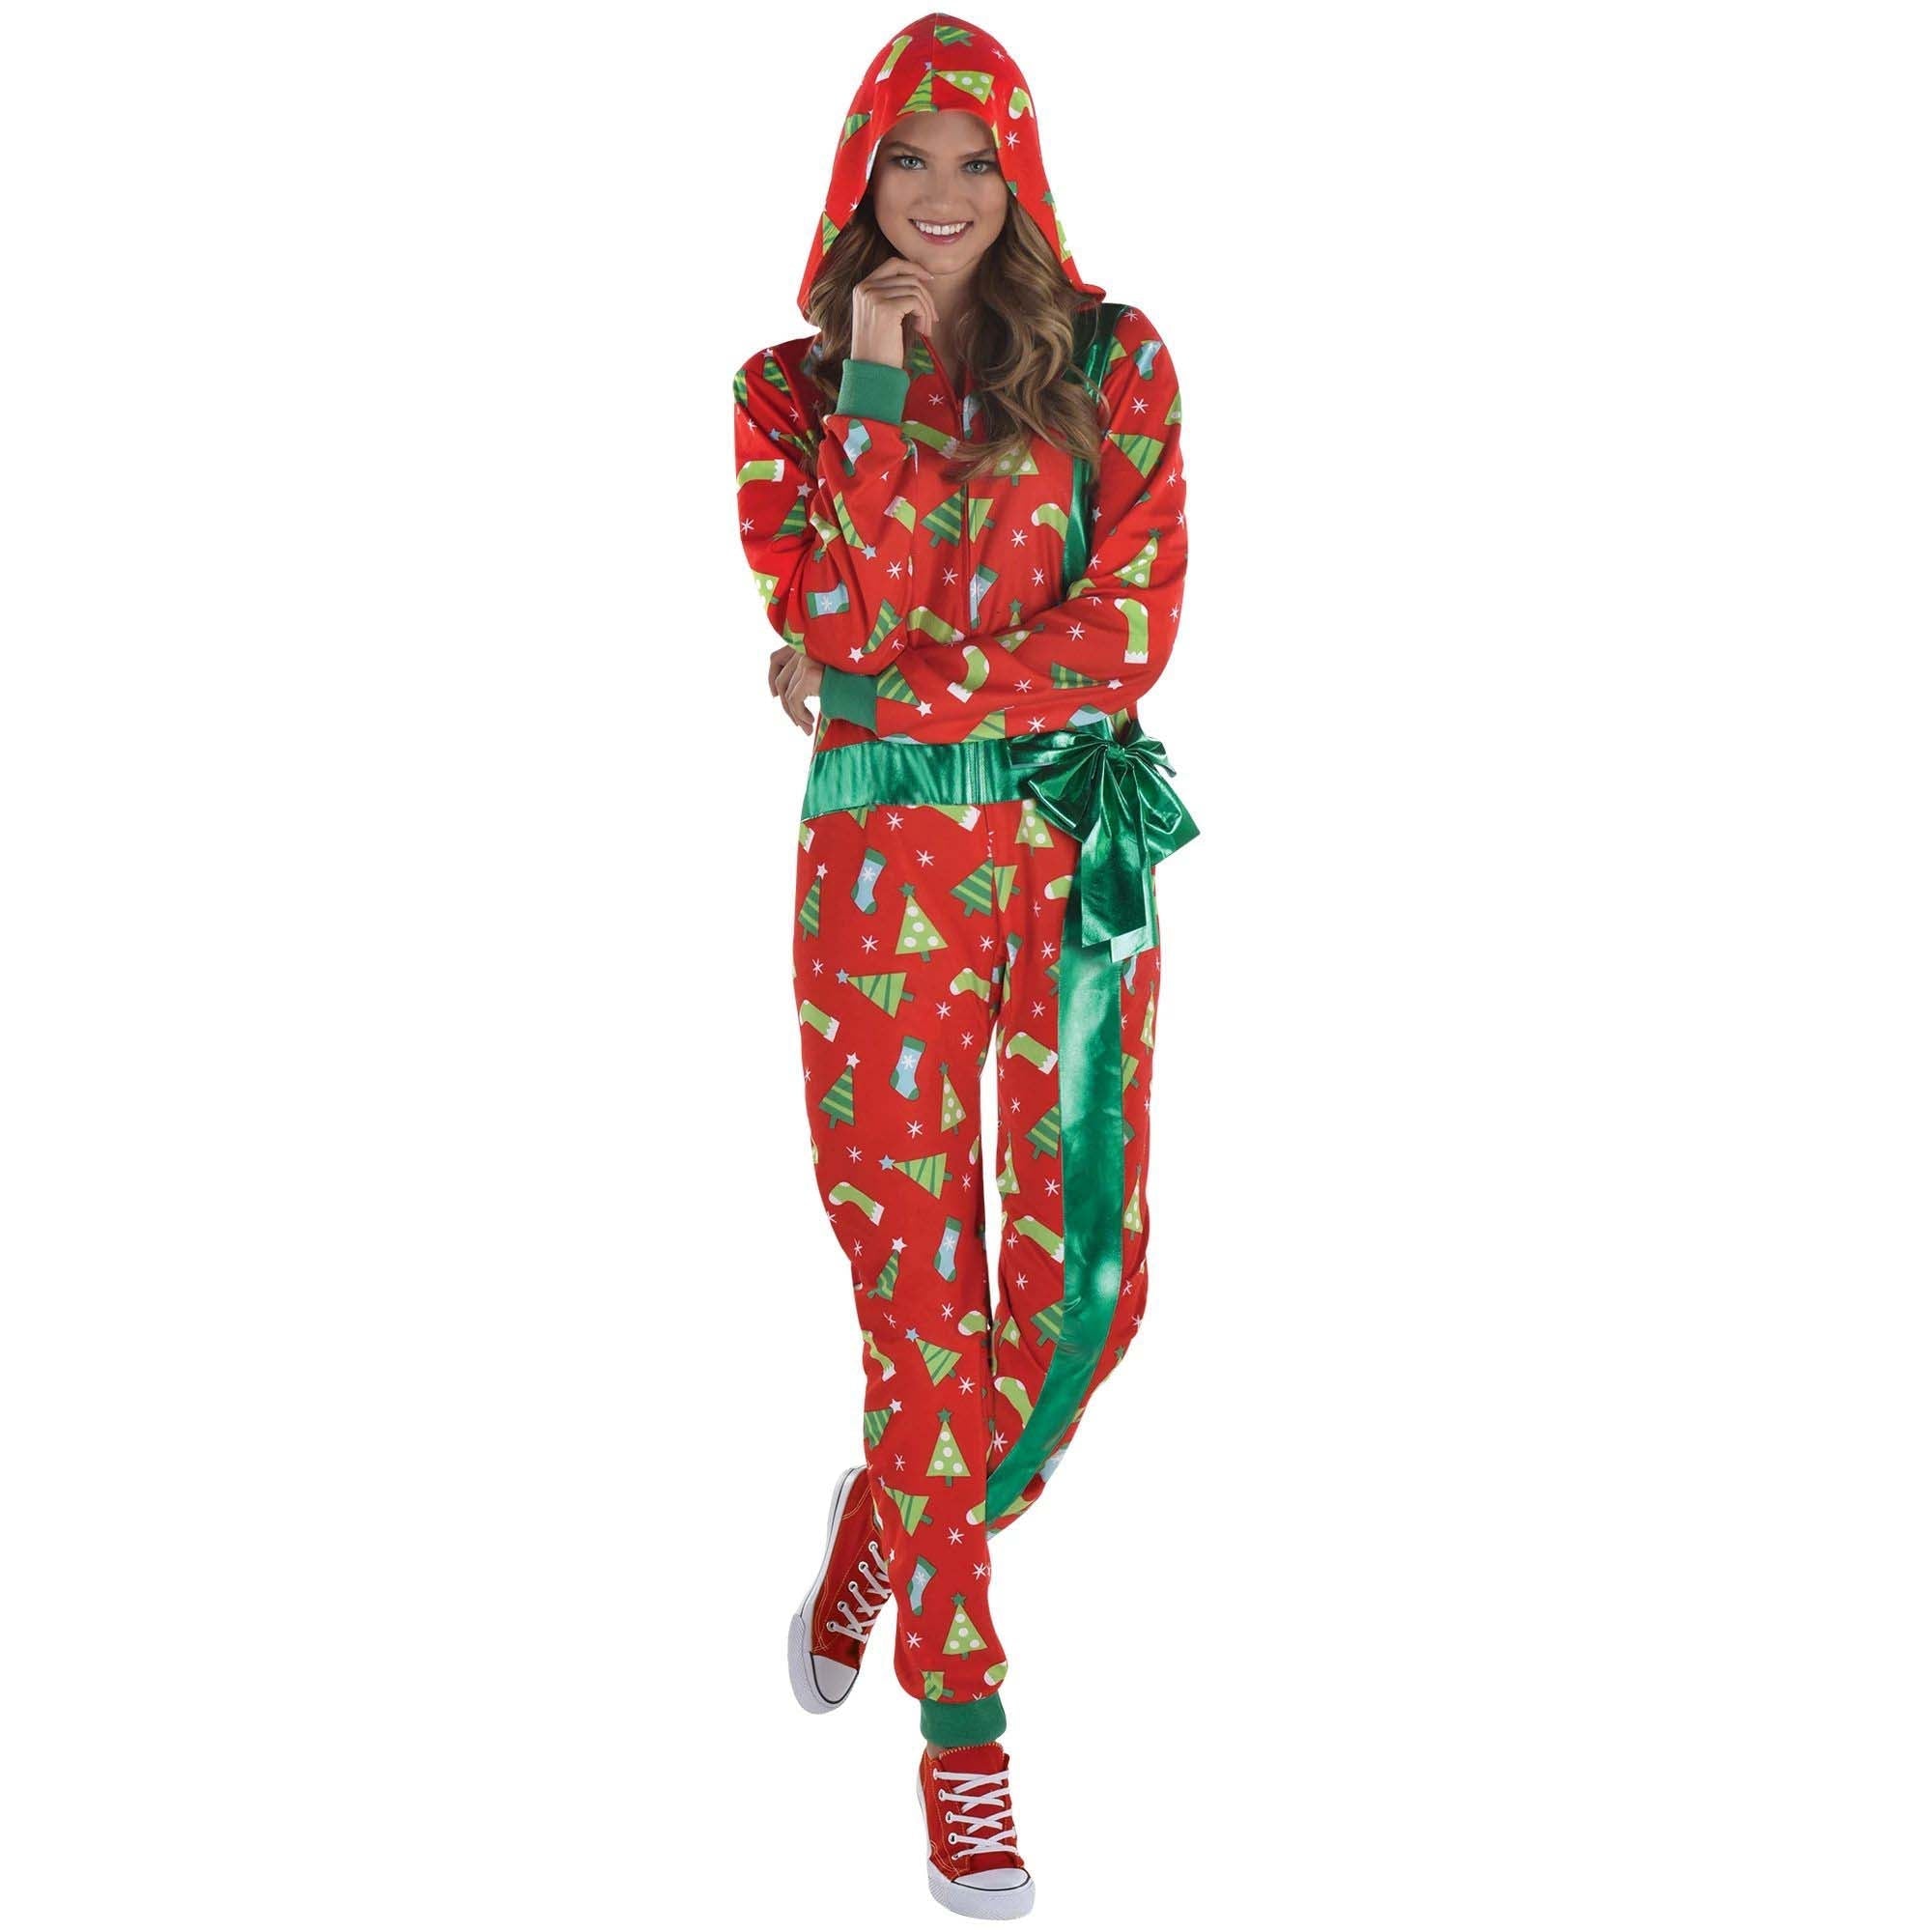 Gift Zipster Costume for Adults, Red and Green Onesie